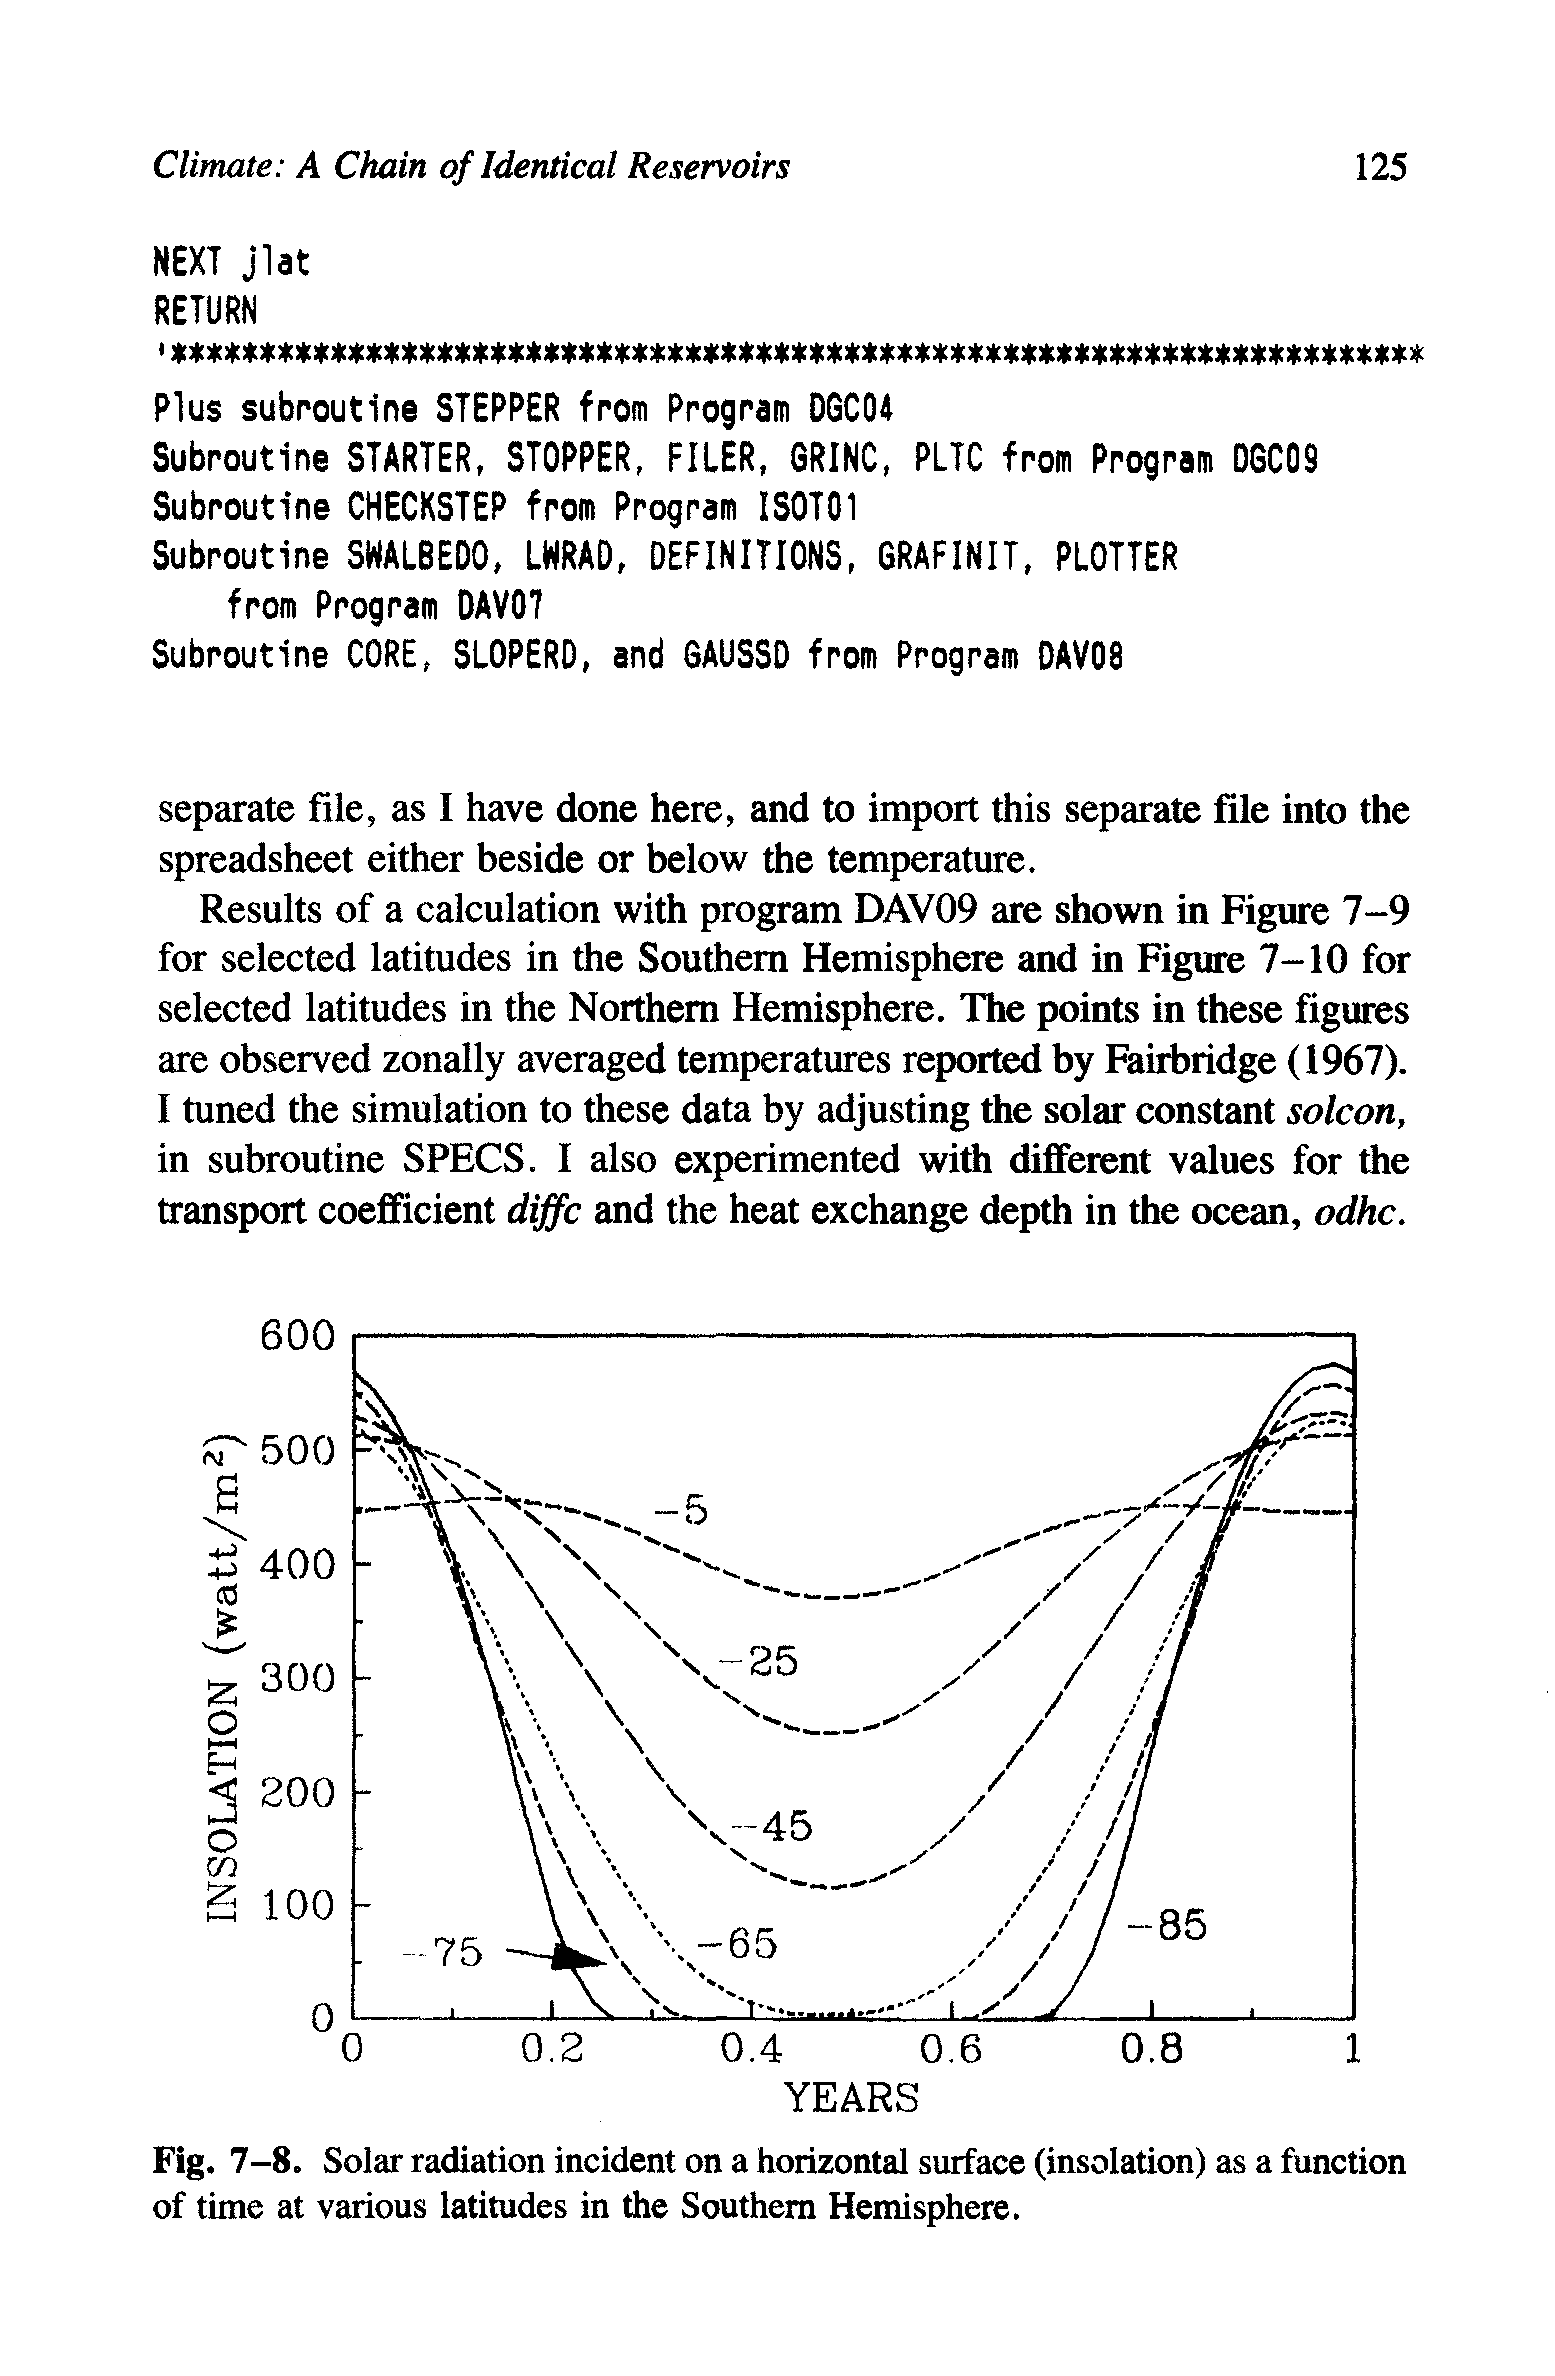 Fig. 7-8. Solar radiation incident on a horizontal surface (insolation) as a function of time at various latitudes in the Southern Hemisphere.